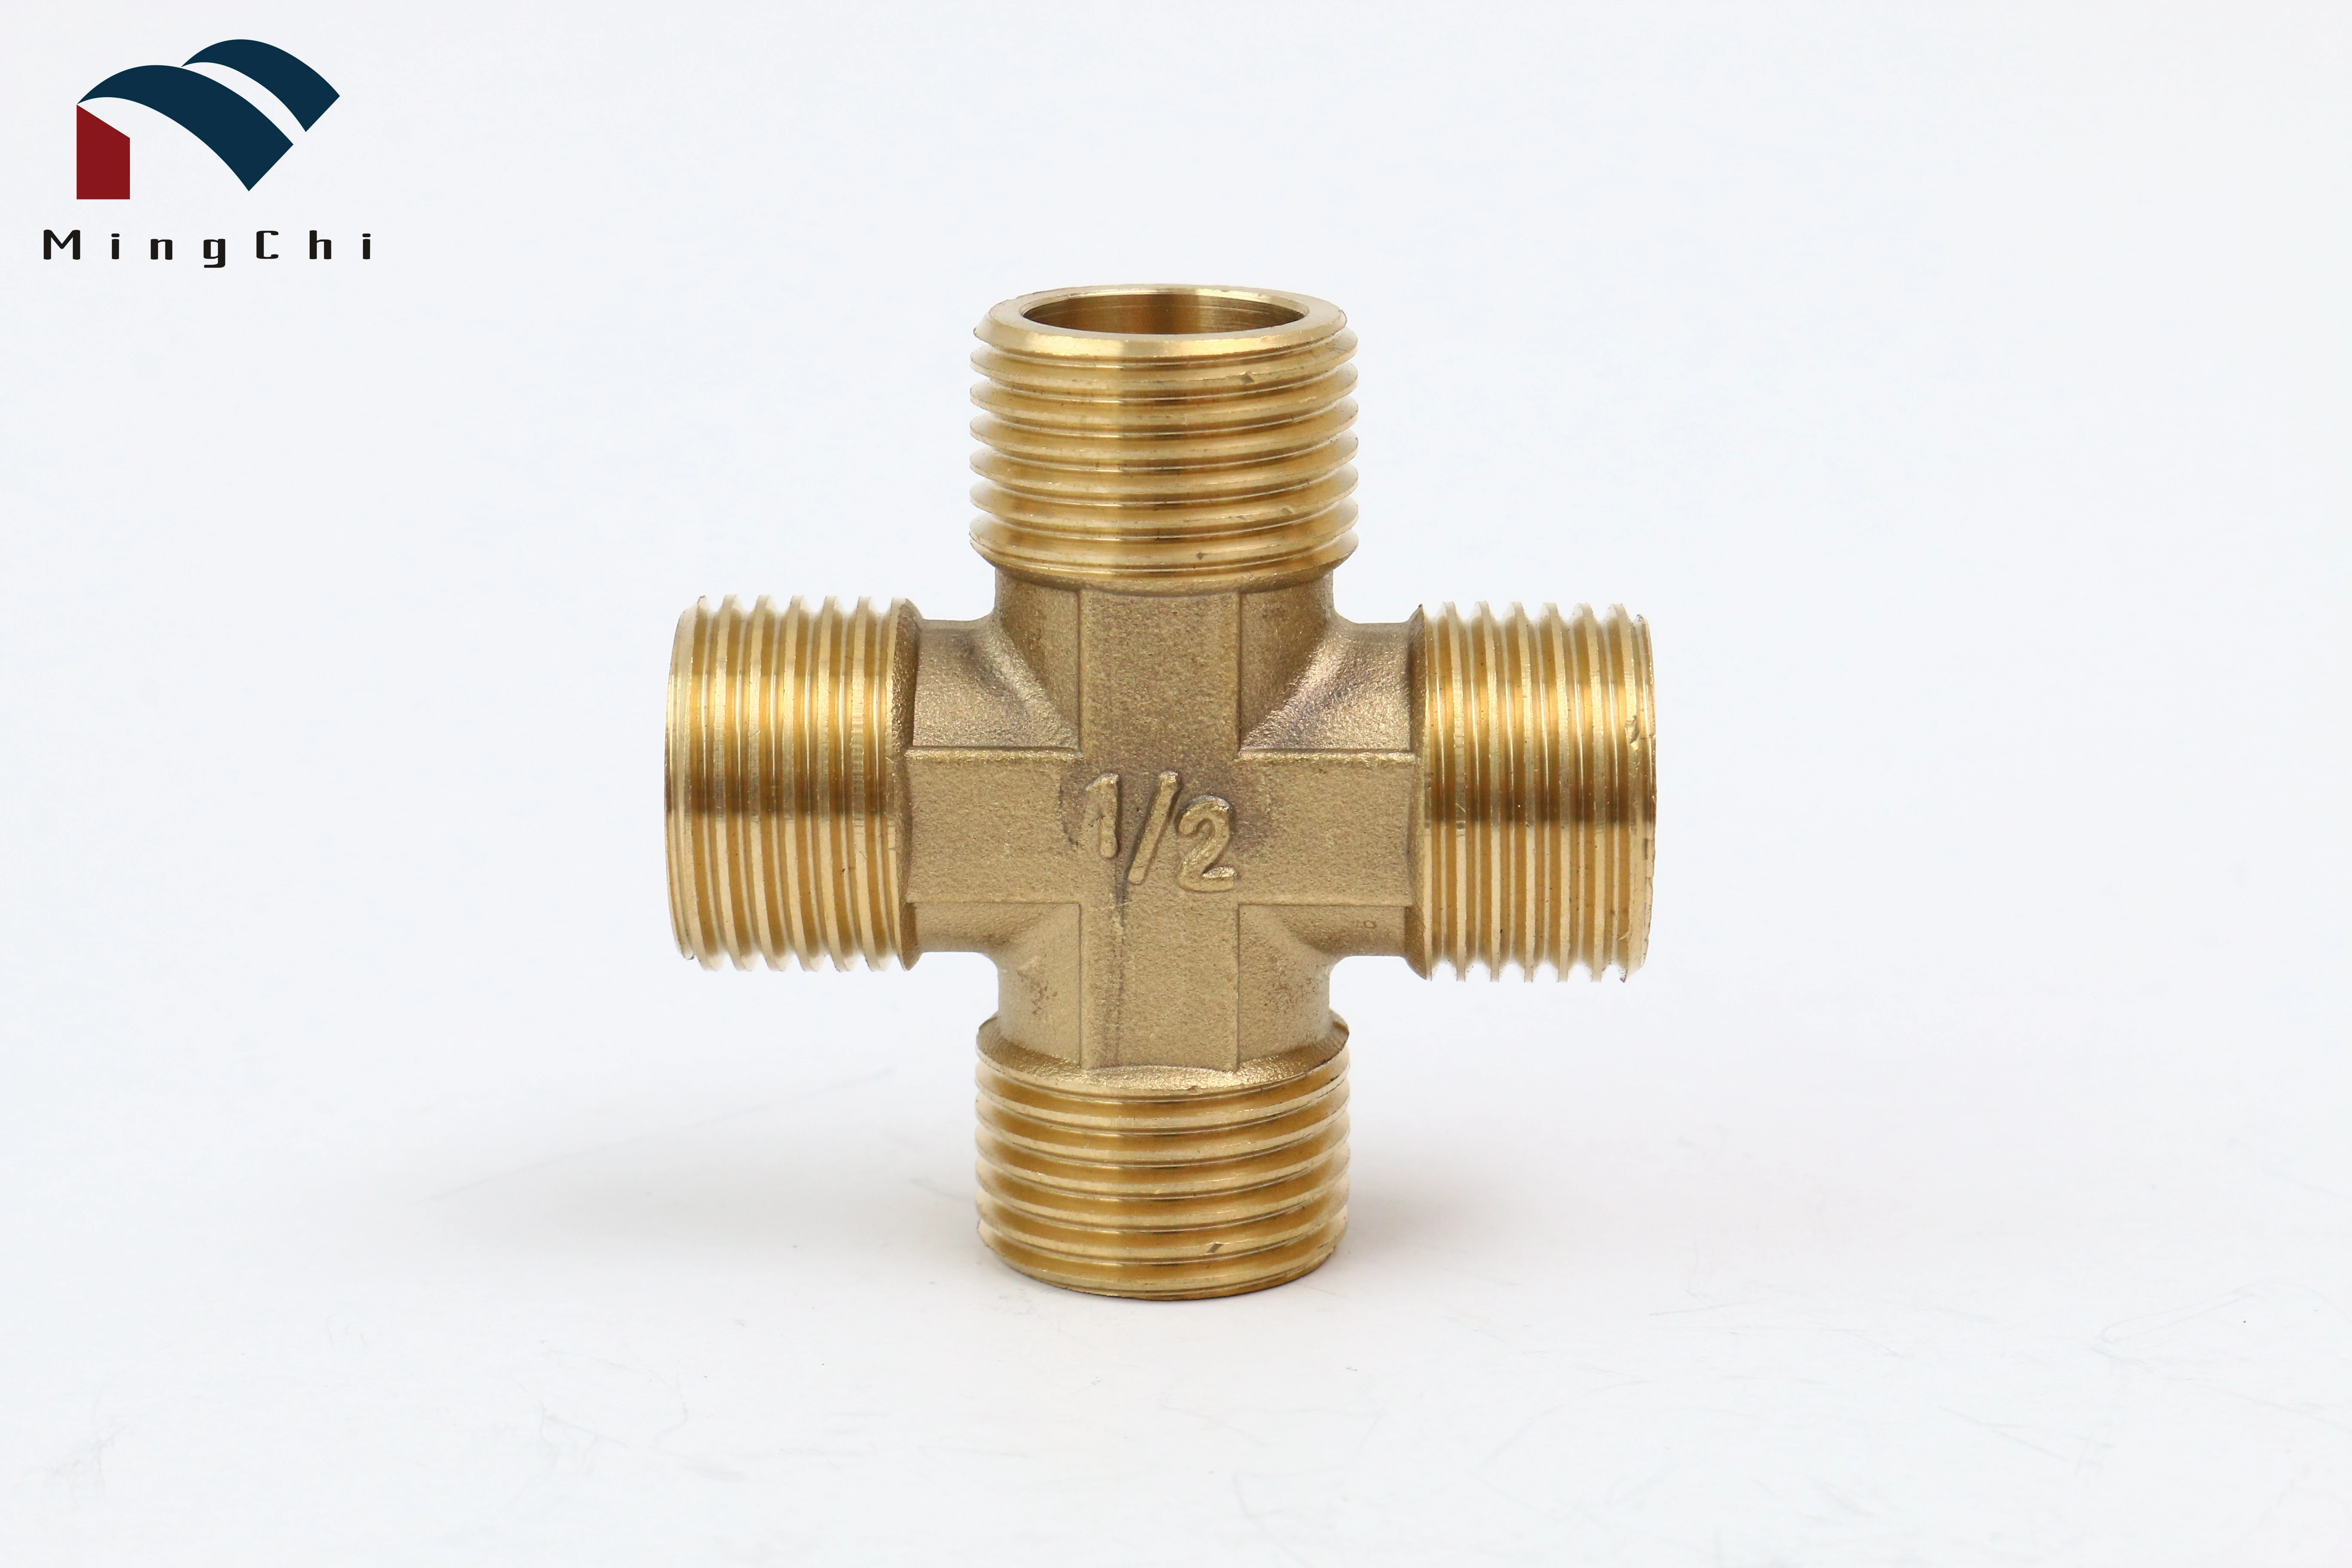 OEM Brass All Thread Male Cross Plumbing Accessories Sanitary Coupling Pipe Fittings Square Tube Connector